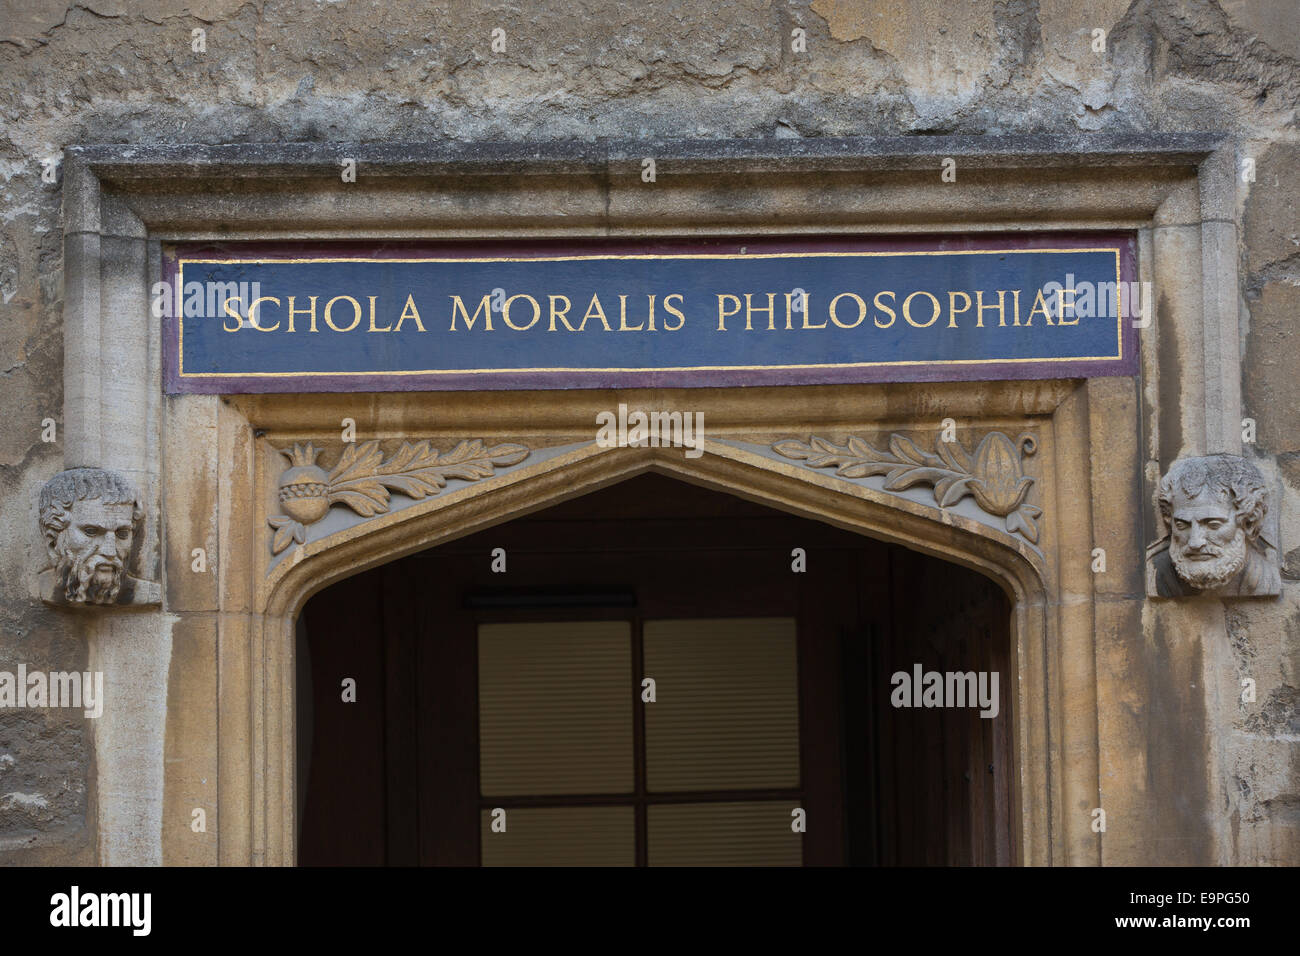 Doorway to Schola Moralis Philosophiae (School of Moral Philosophy) at the Bodleian Library, University of Oxford, England, UK Stock Photo